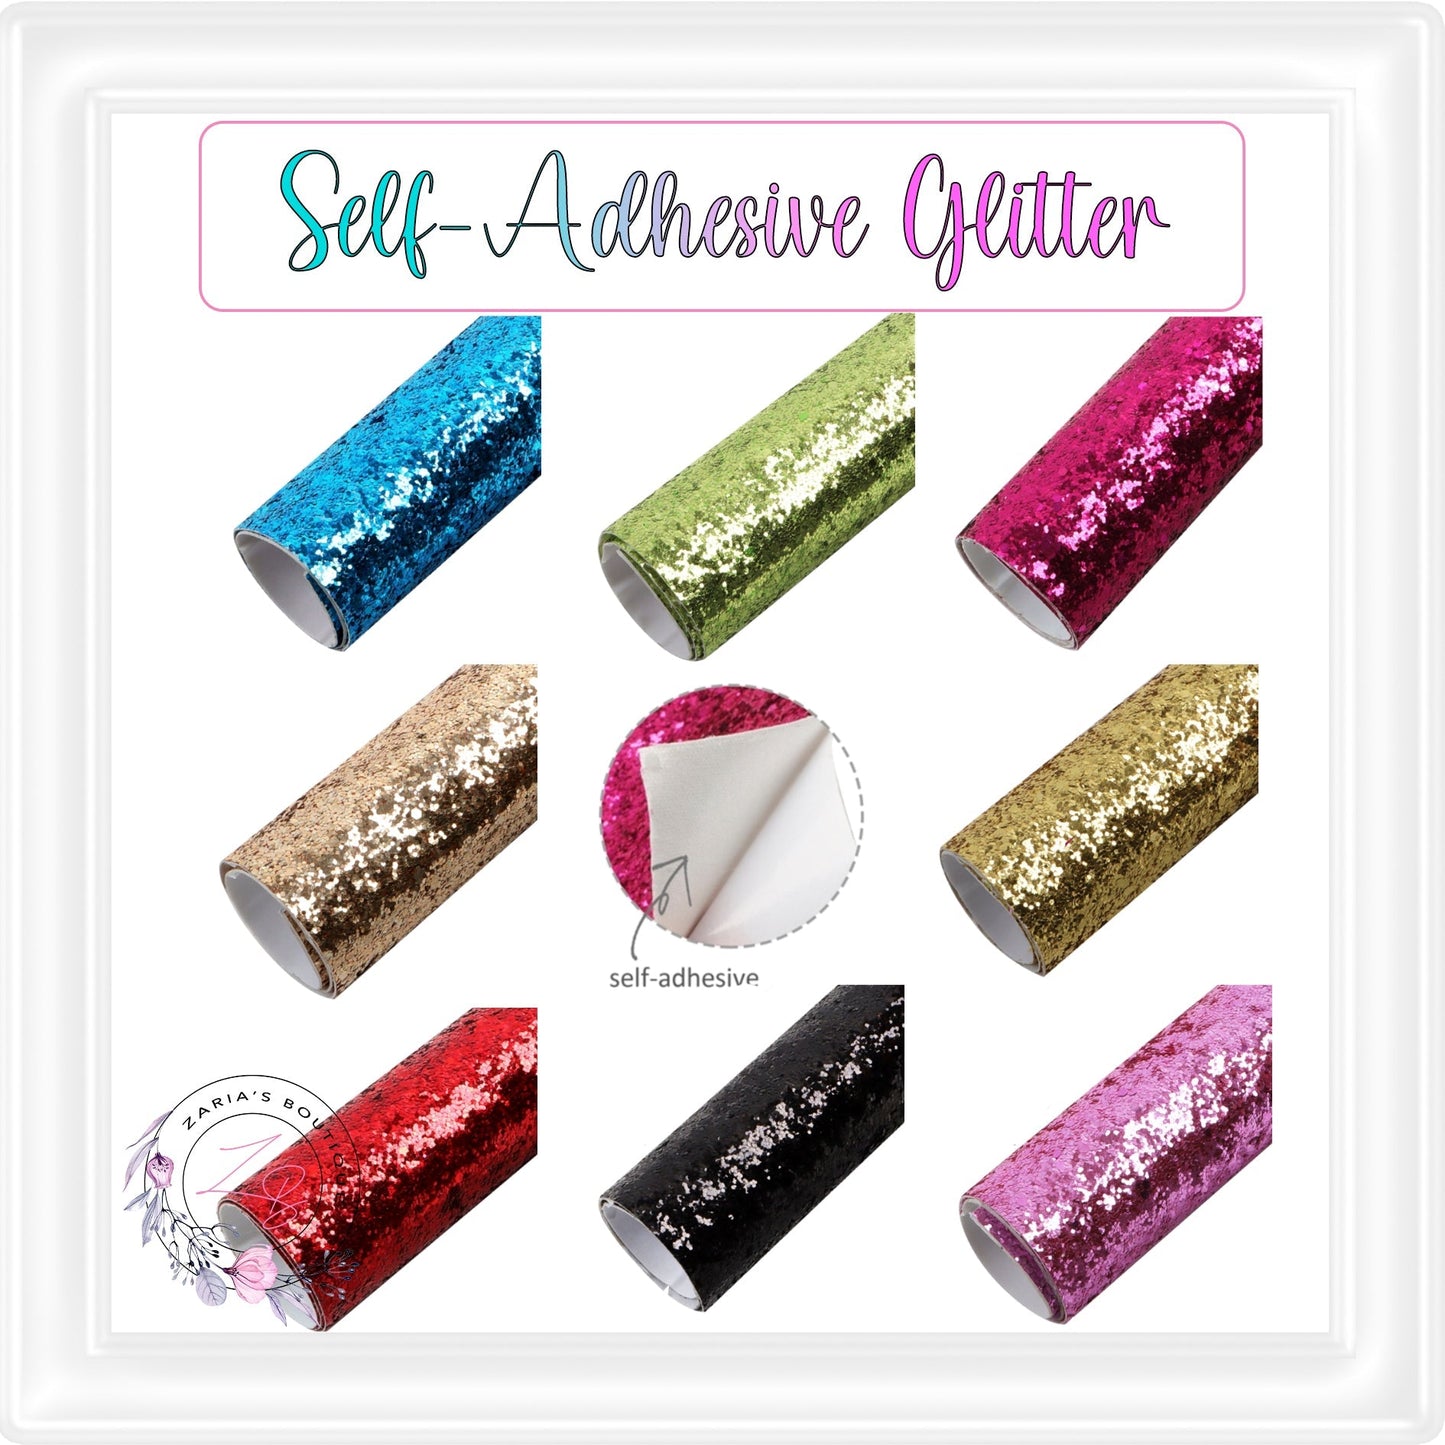 ⋅ Self-Adhesive Backed Medium Glitter ⋅ For Double-Sided Projects ⋅ RED ⋅